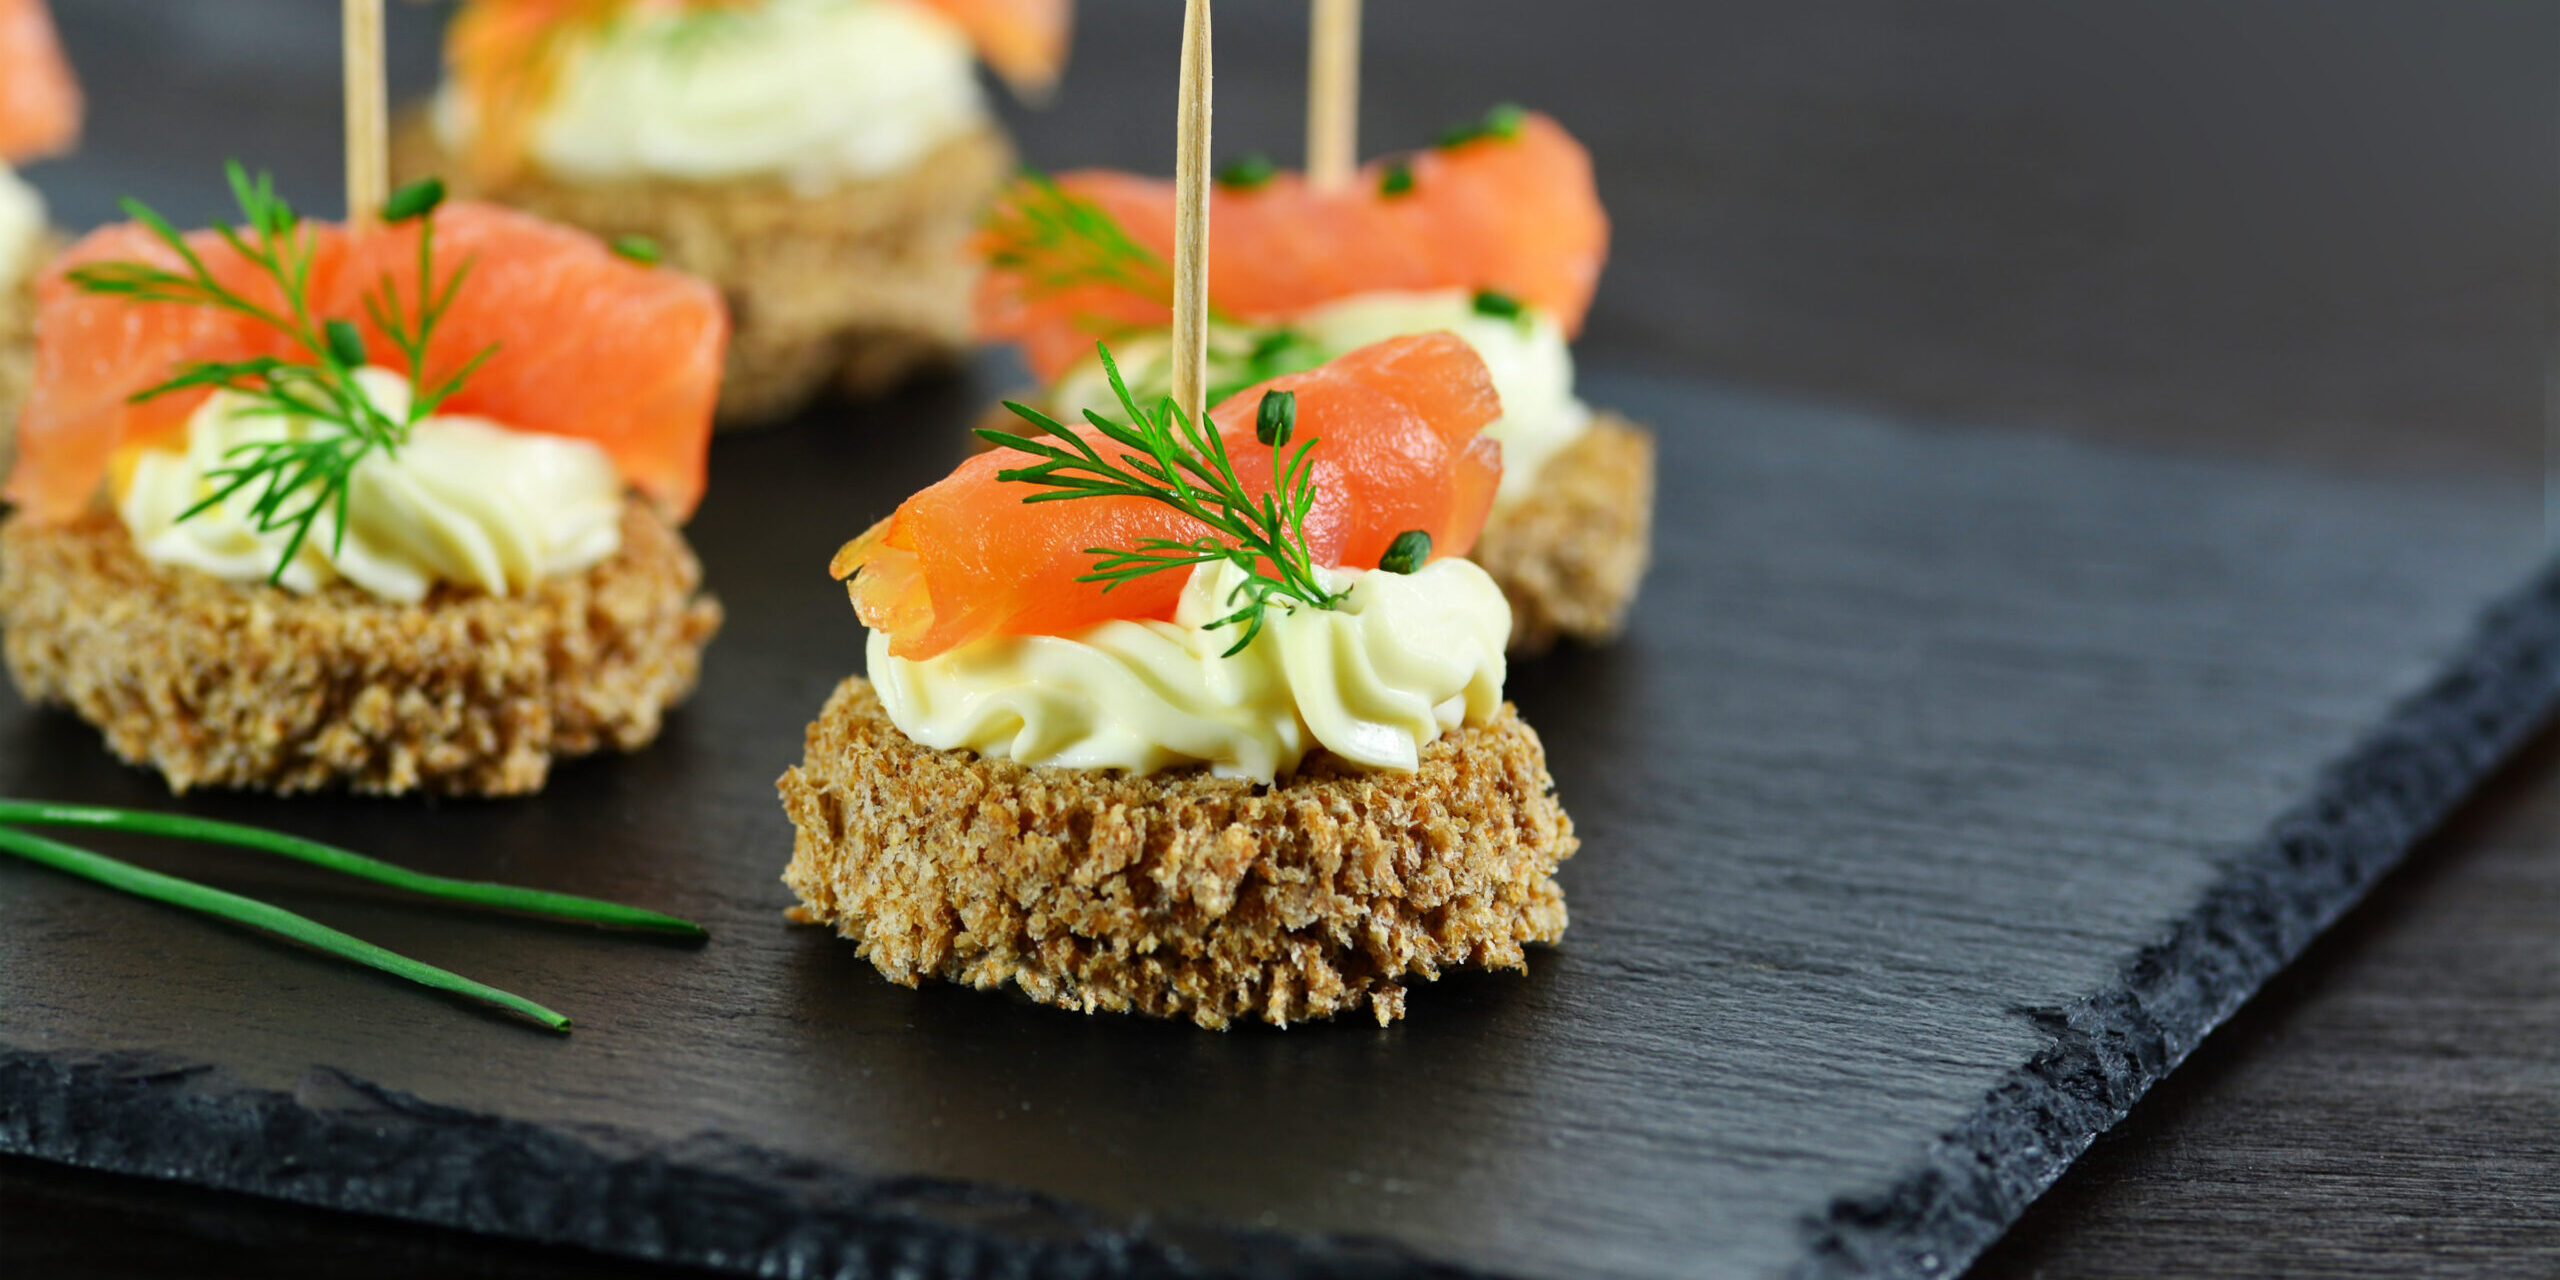 Smoked,Salmon,Canapes,With,Cheese,Cream,And,Dill,On,Brown